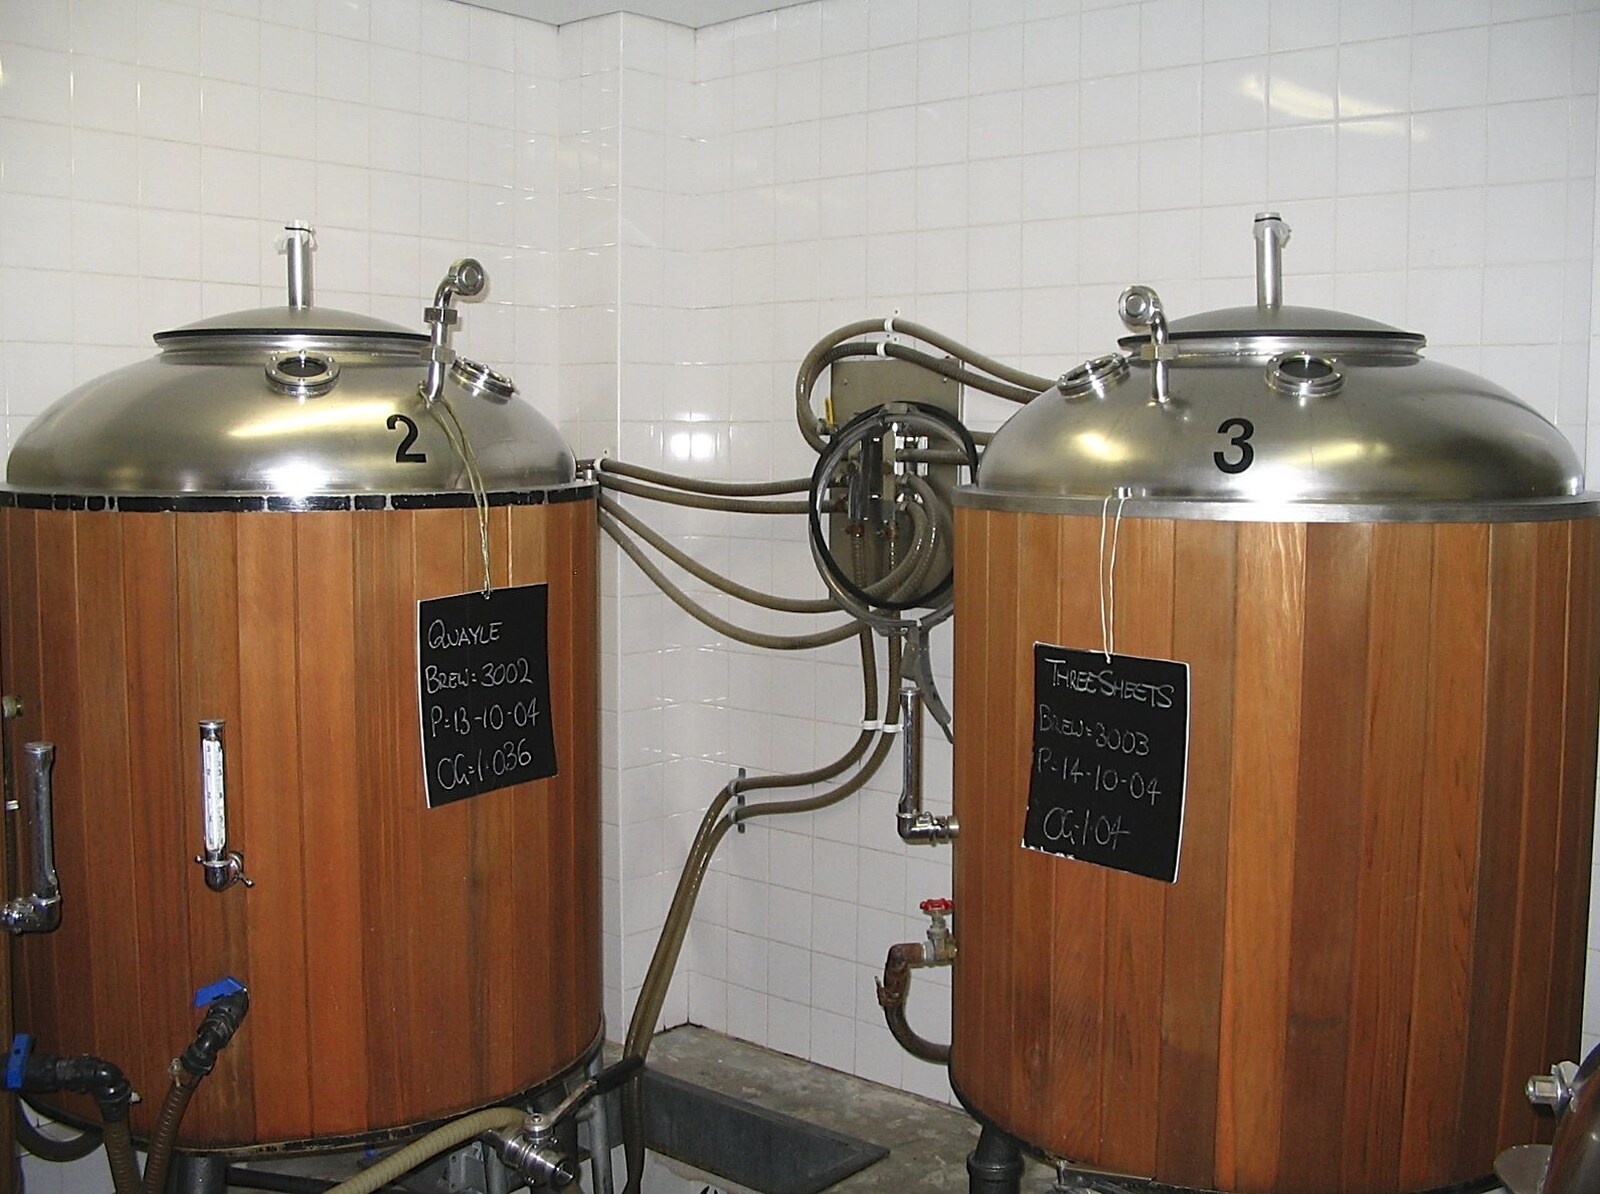 Fermenters in the Nelson's brewery from Sydney, New South Wales, Australia - 10th October 2004